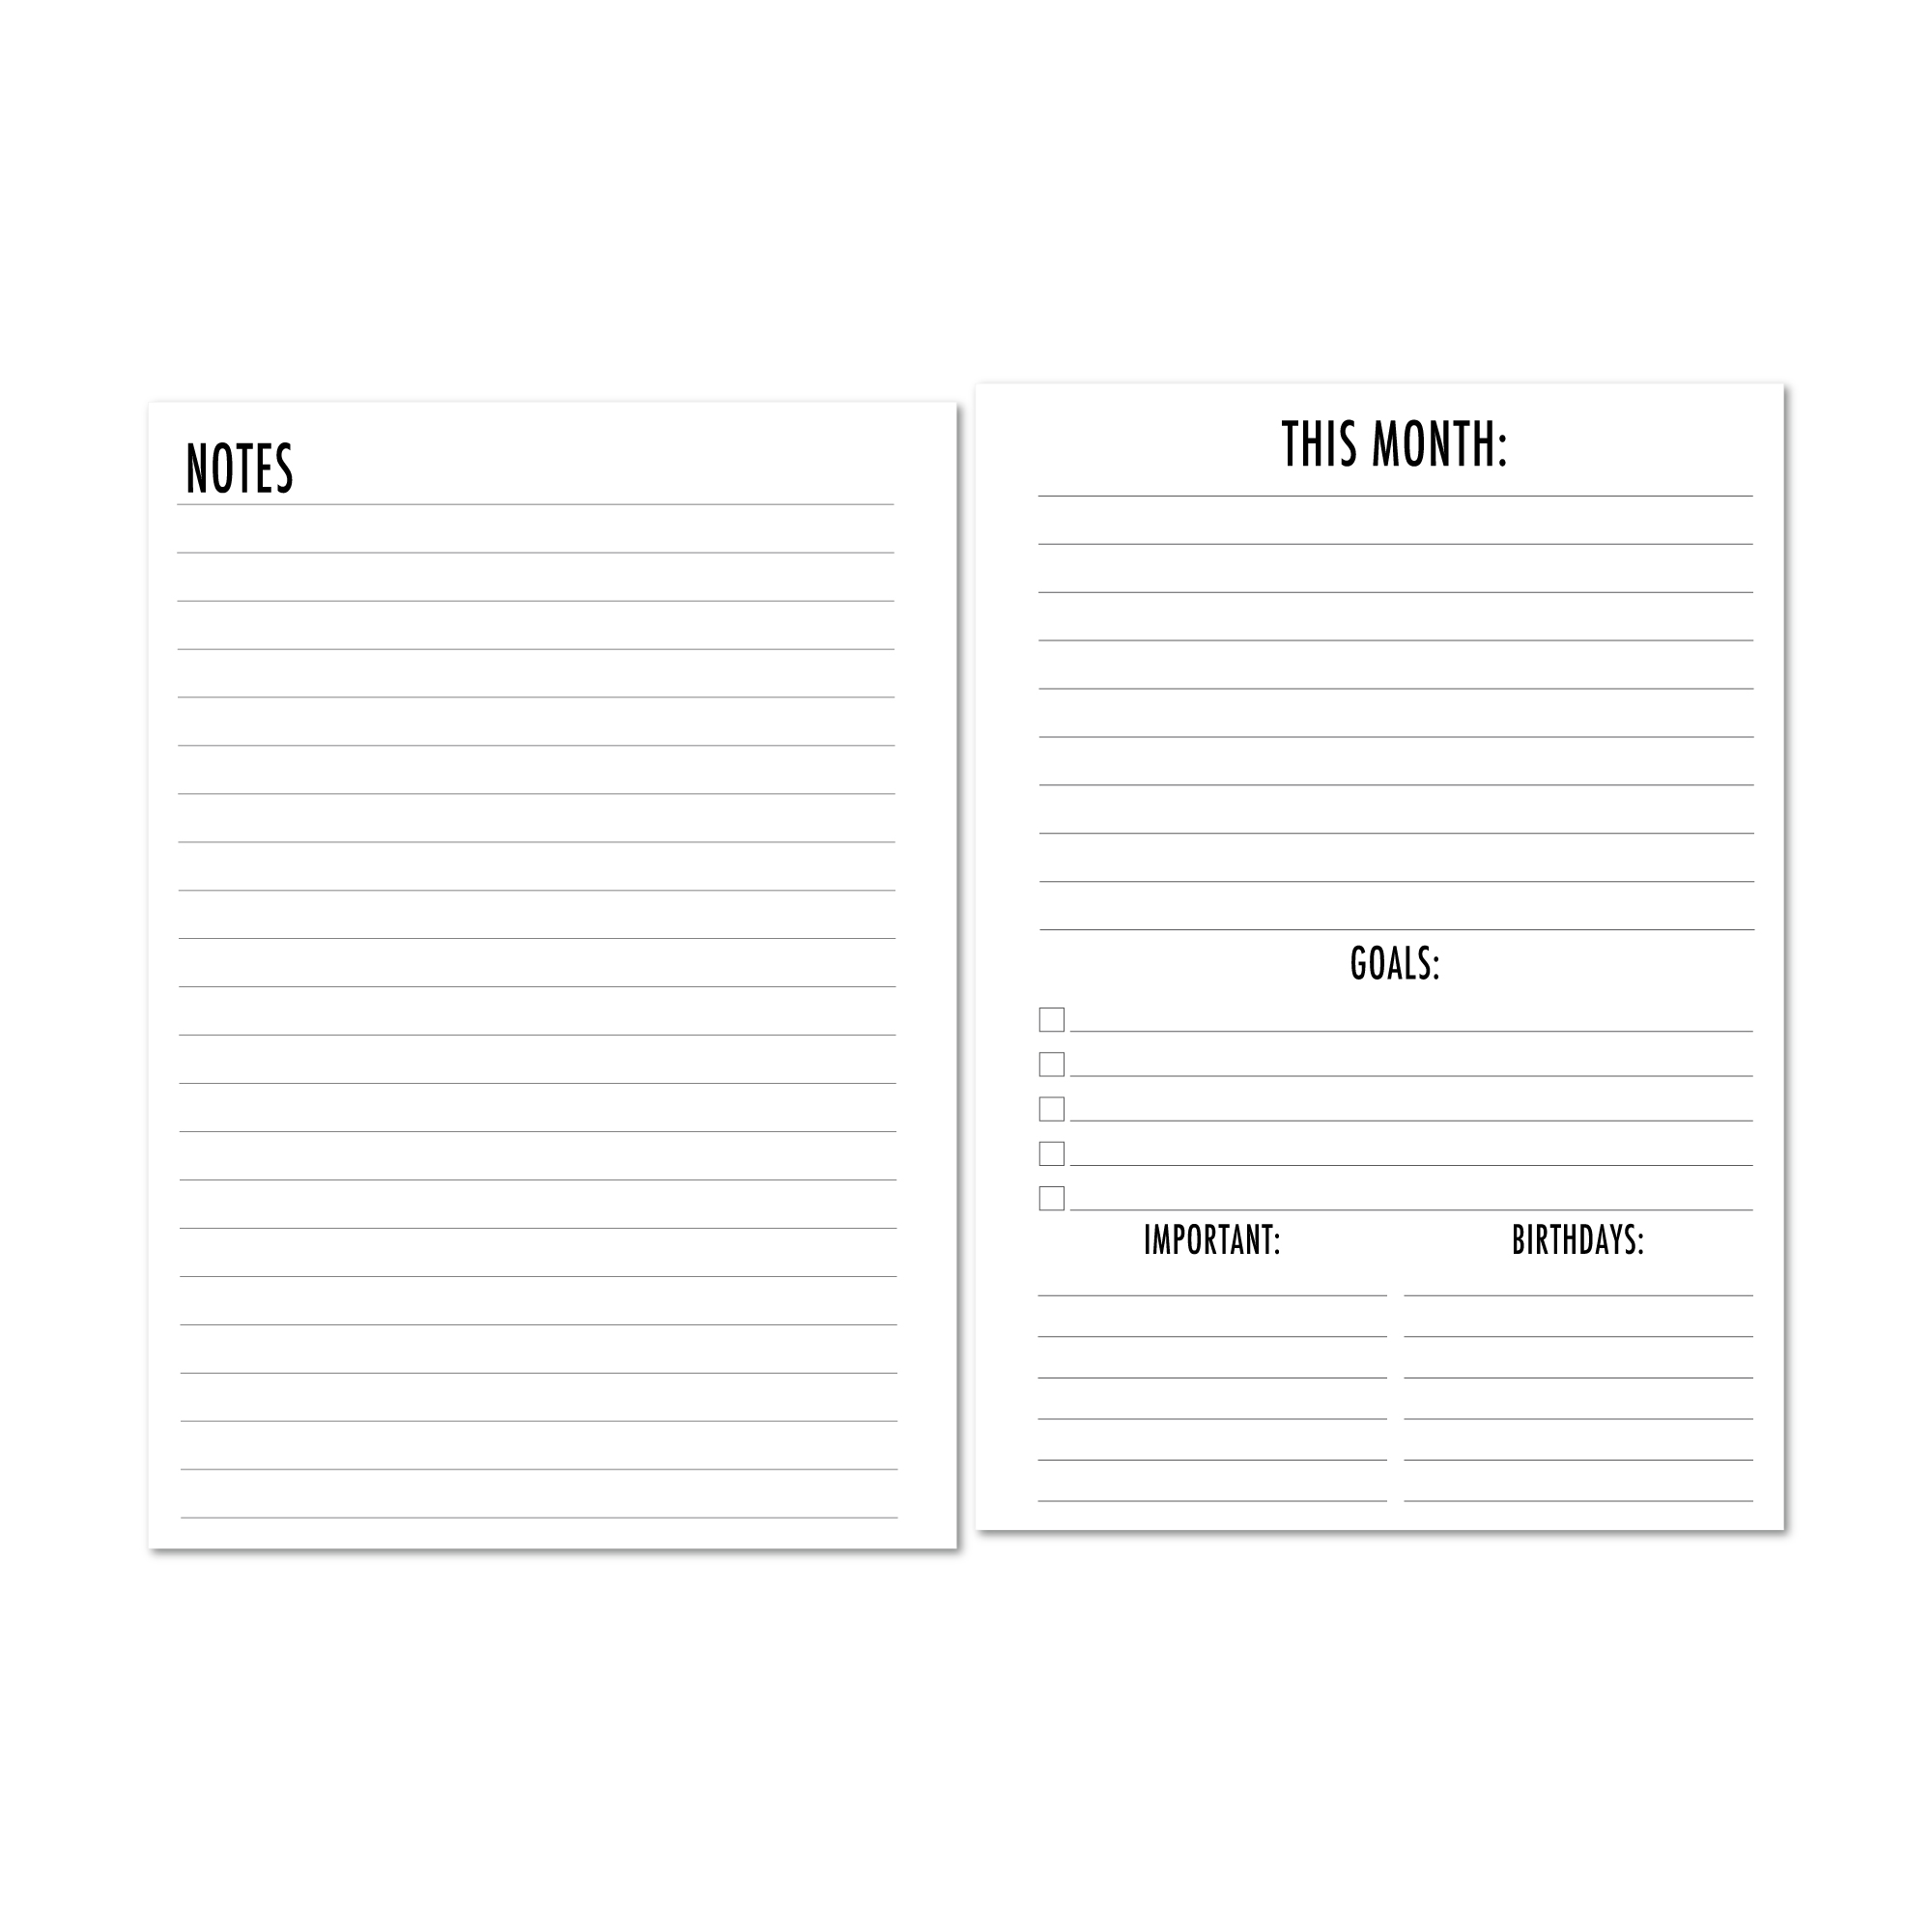 This Month and Notes